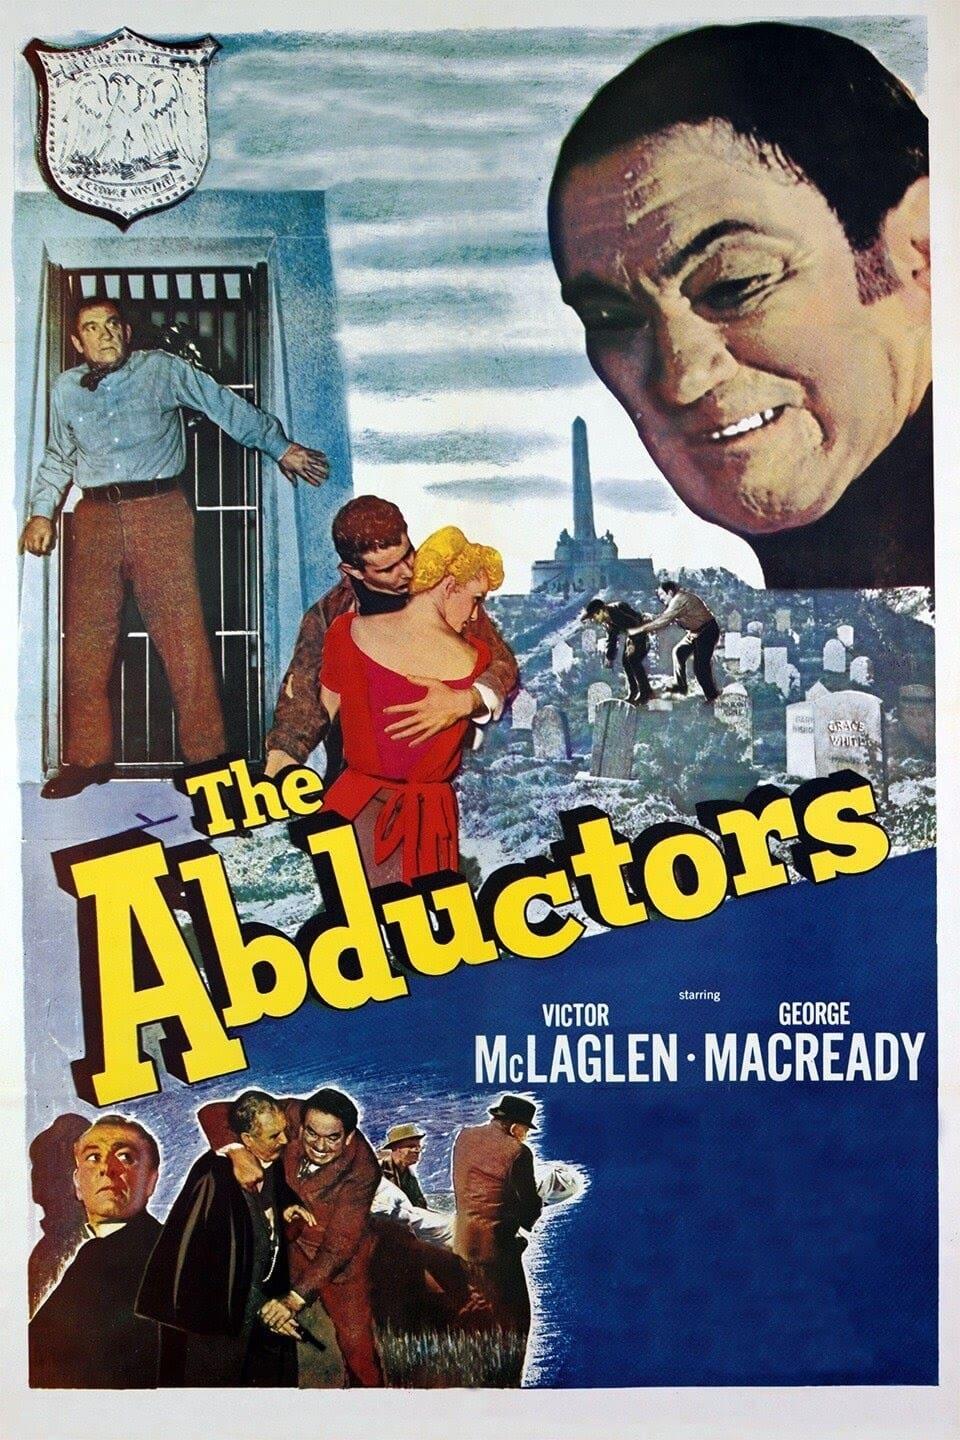 The Abductors poster